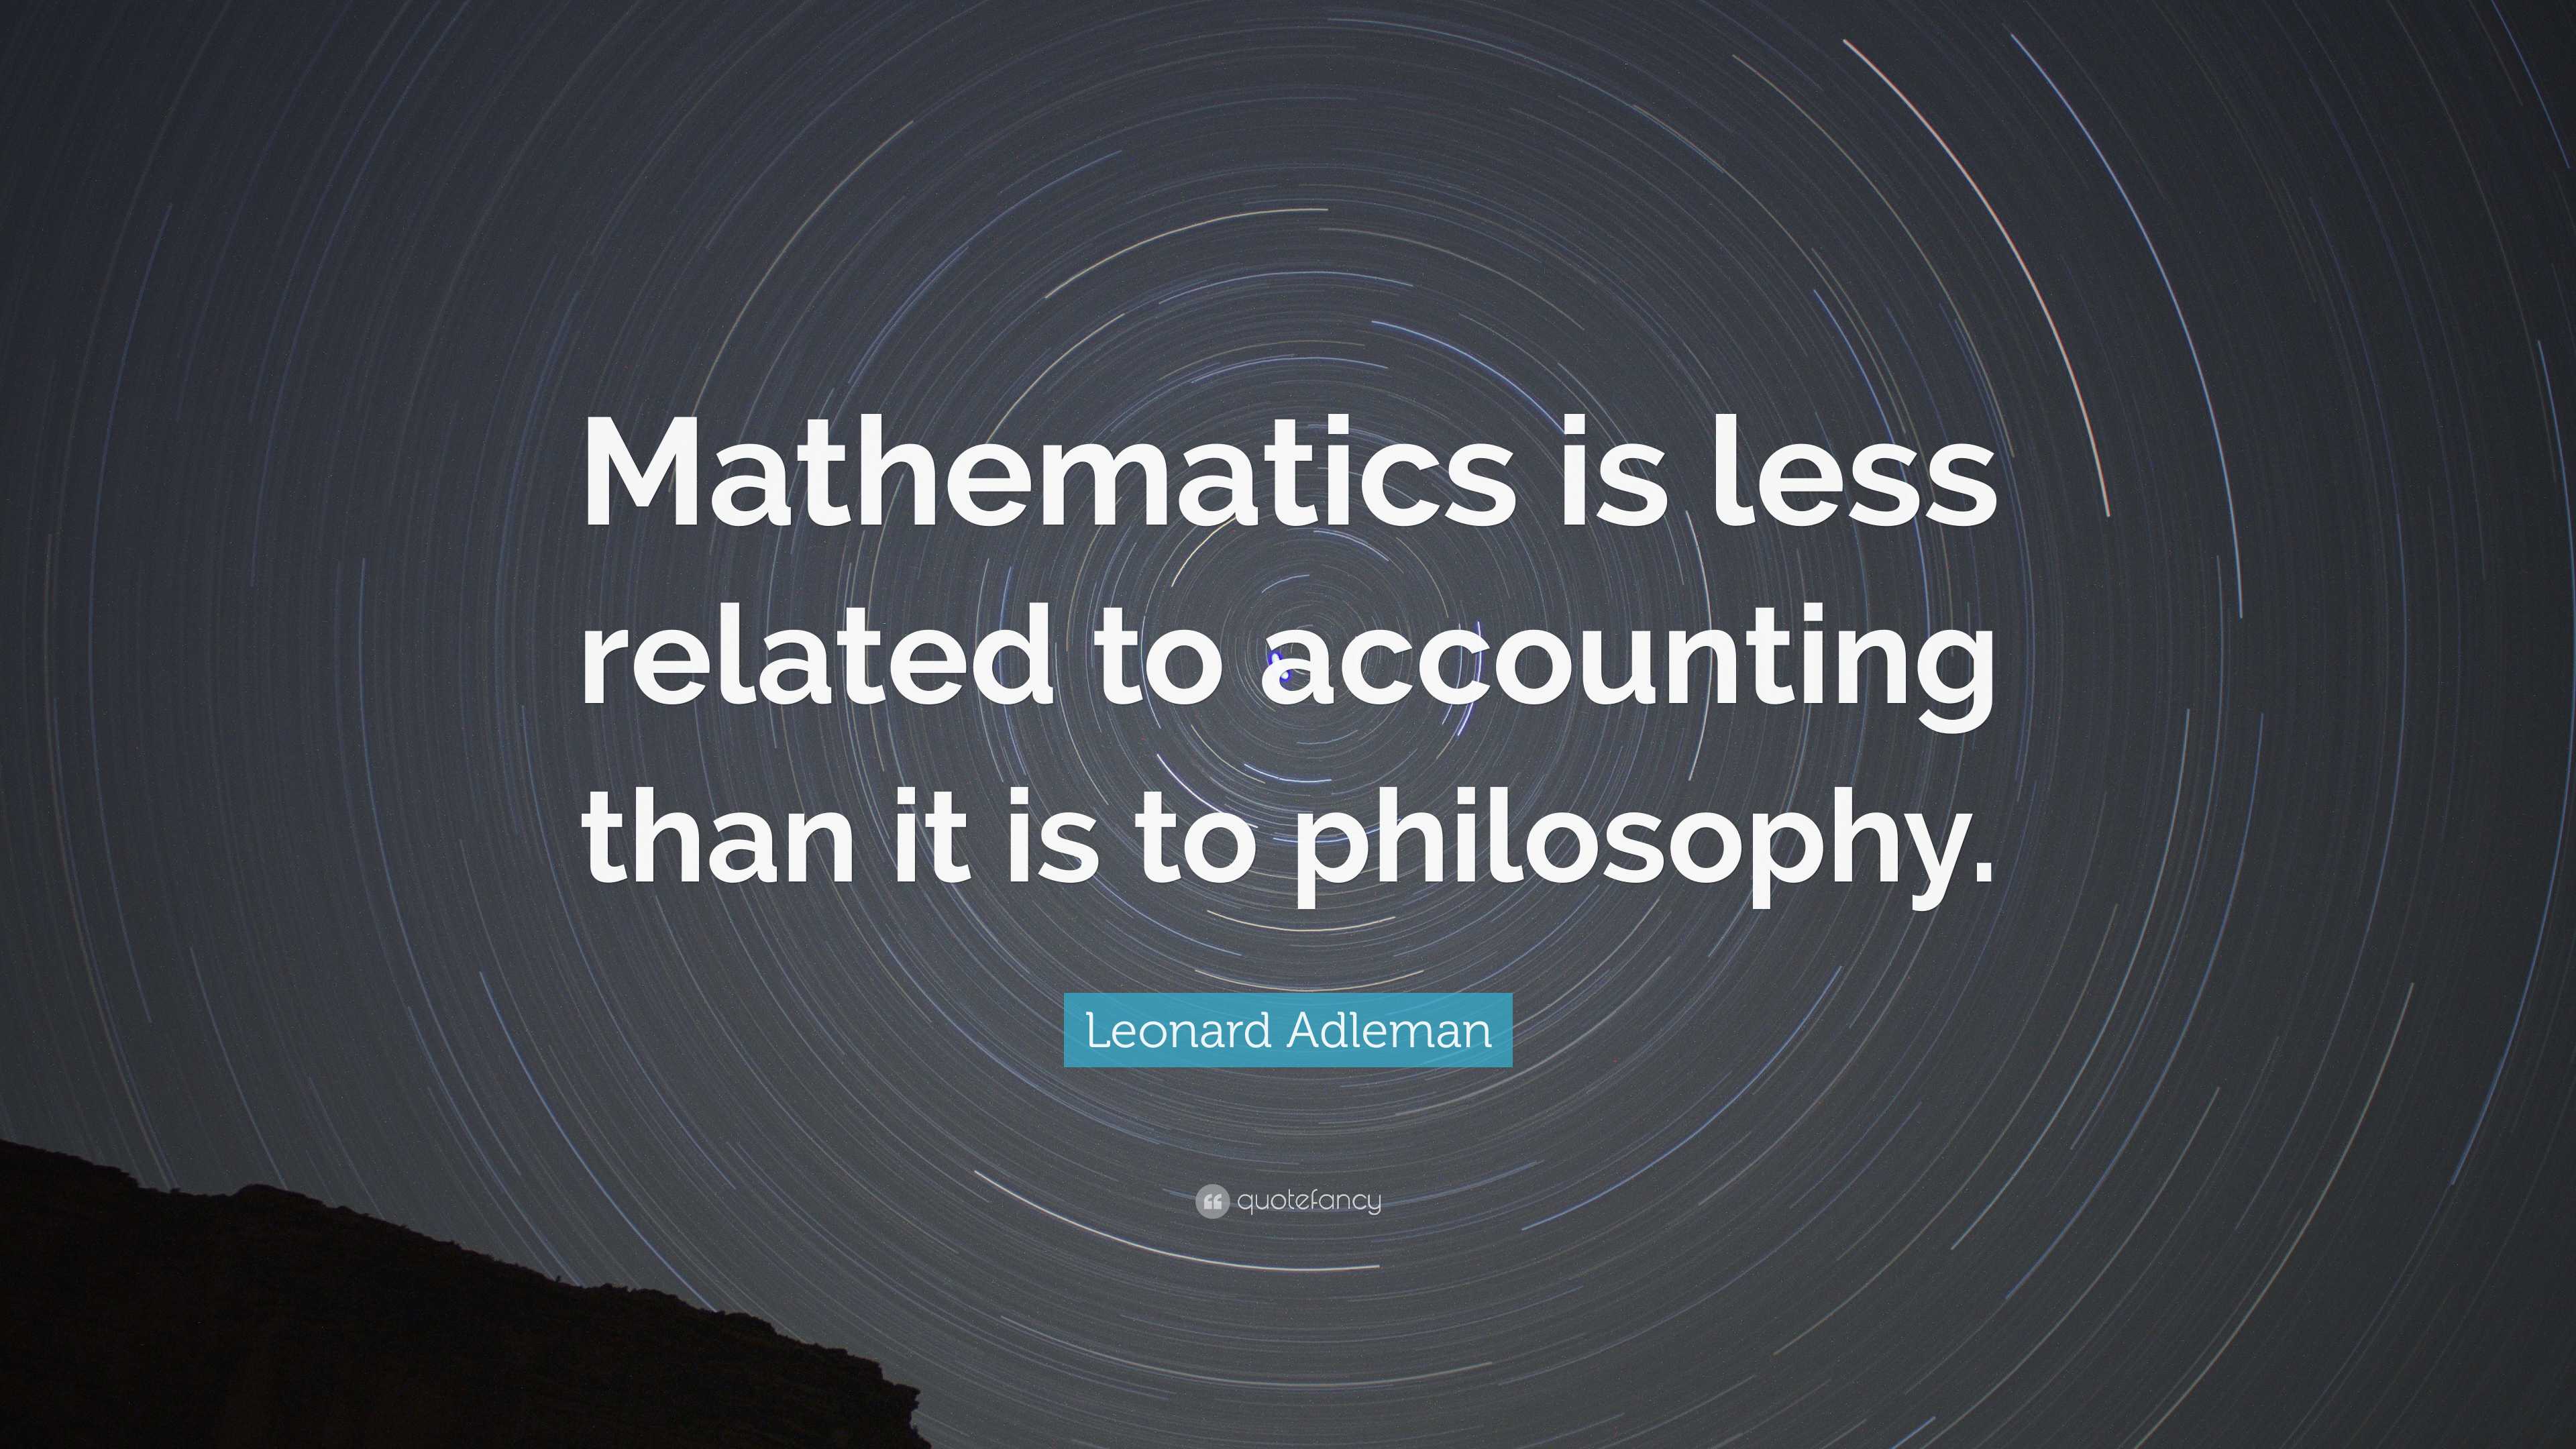 Leonard Adleman Quote: “Mathematics is less related to accounting than ...